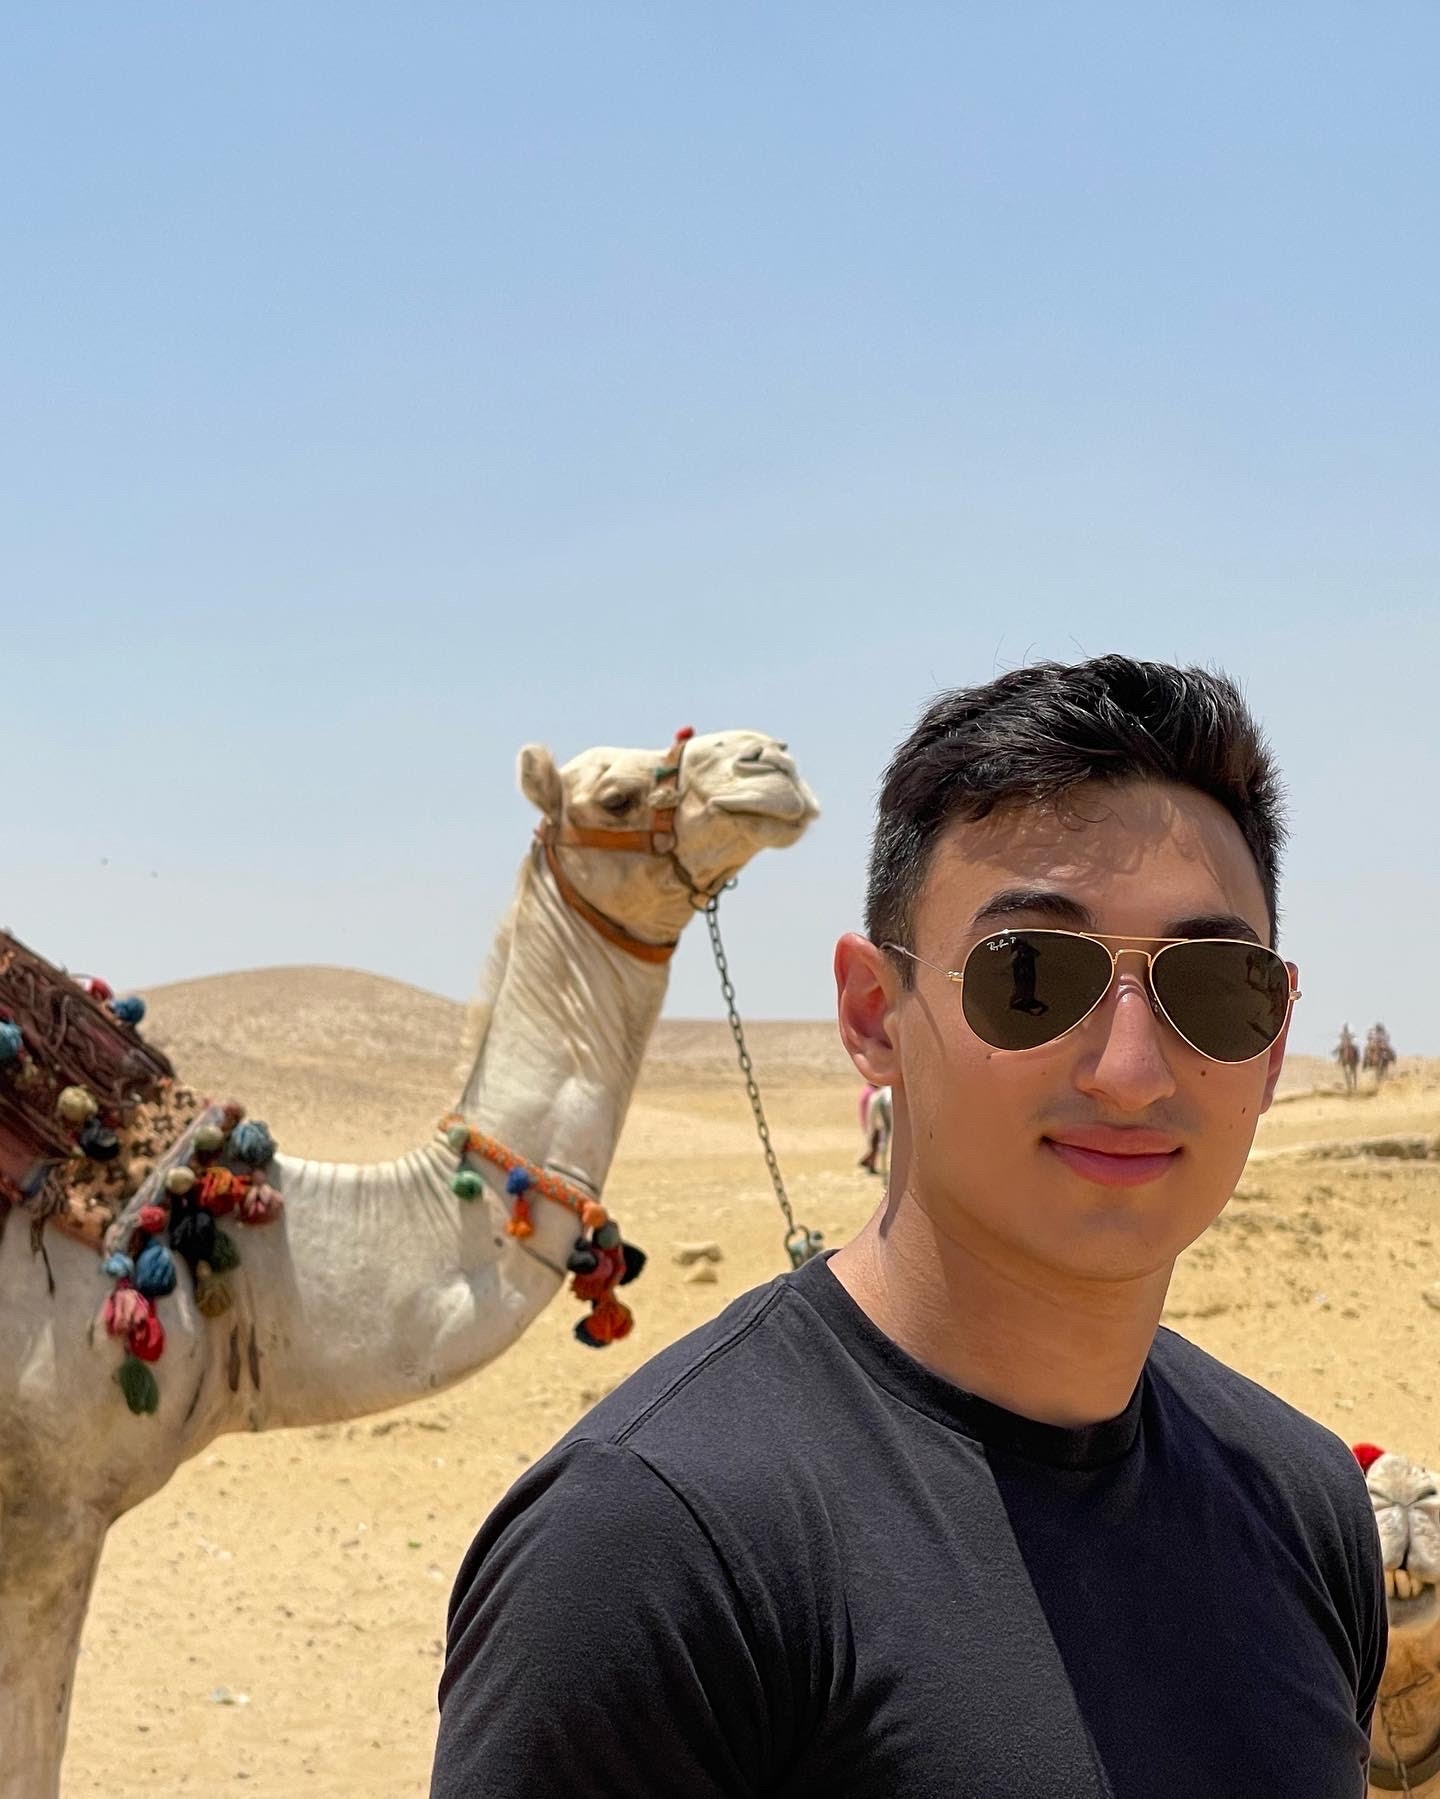 A man in sunglasses stands with a camel